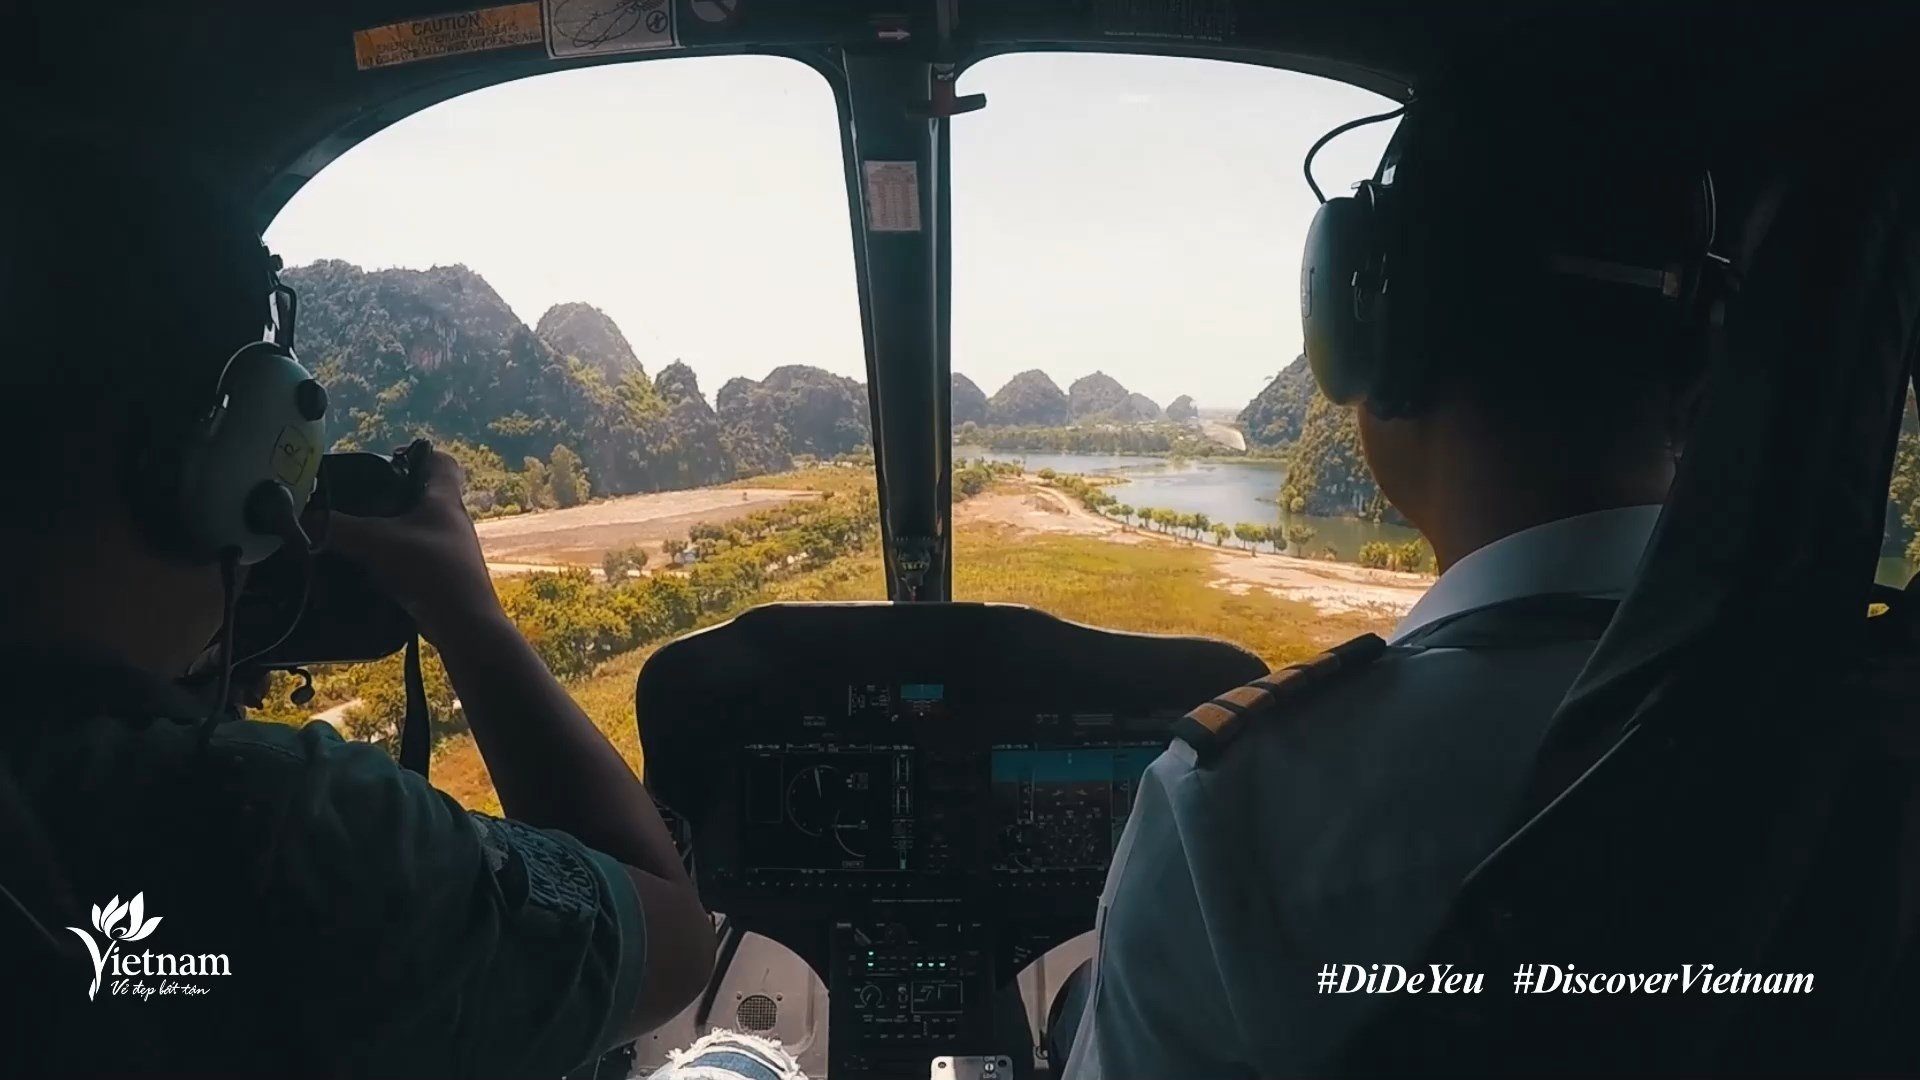 60-second video released featuring Ninh Binh’s natural beauty